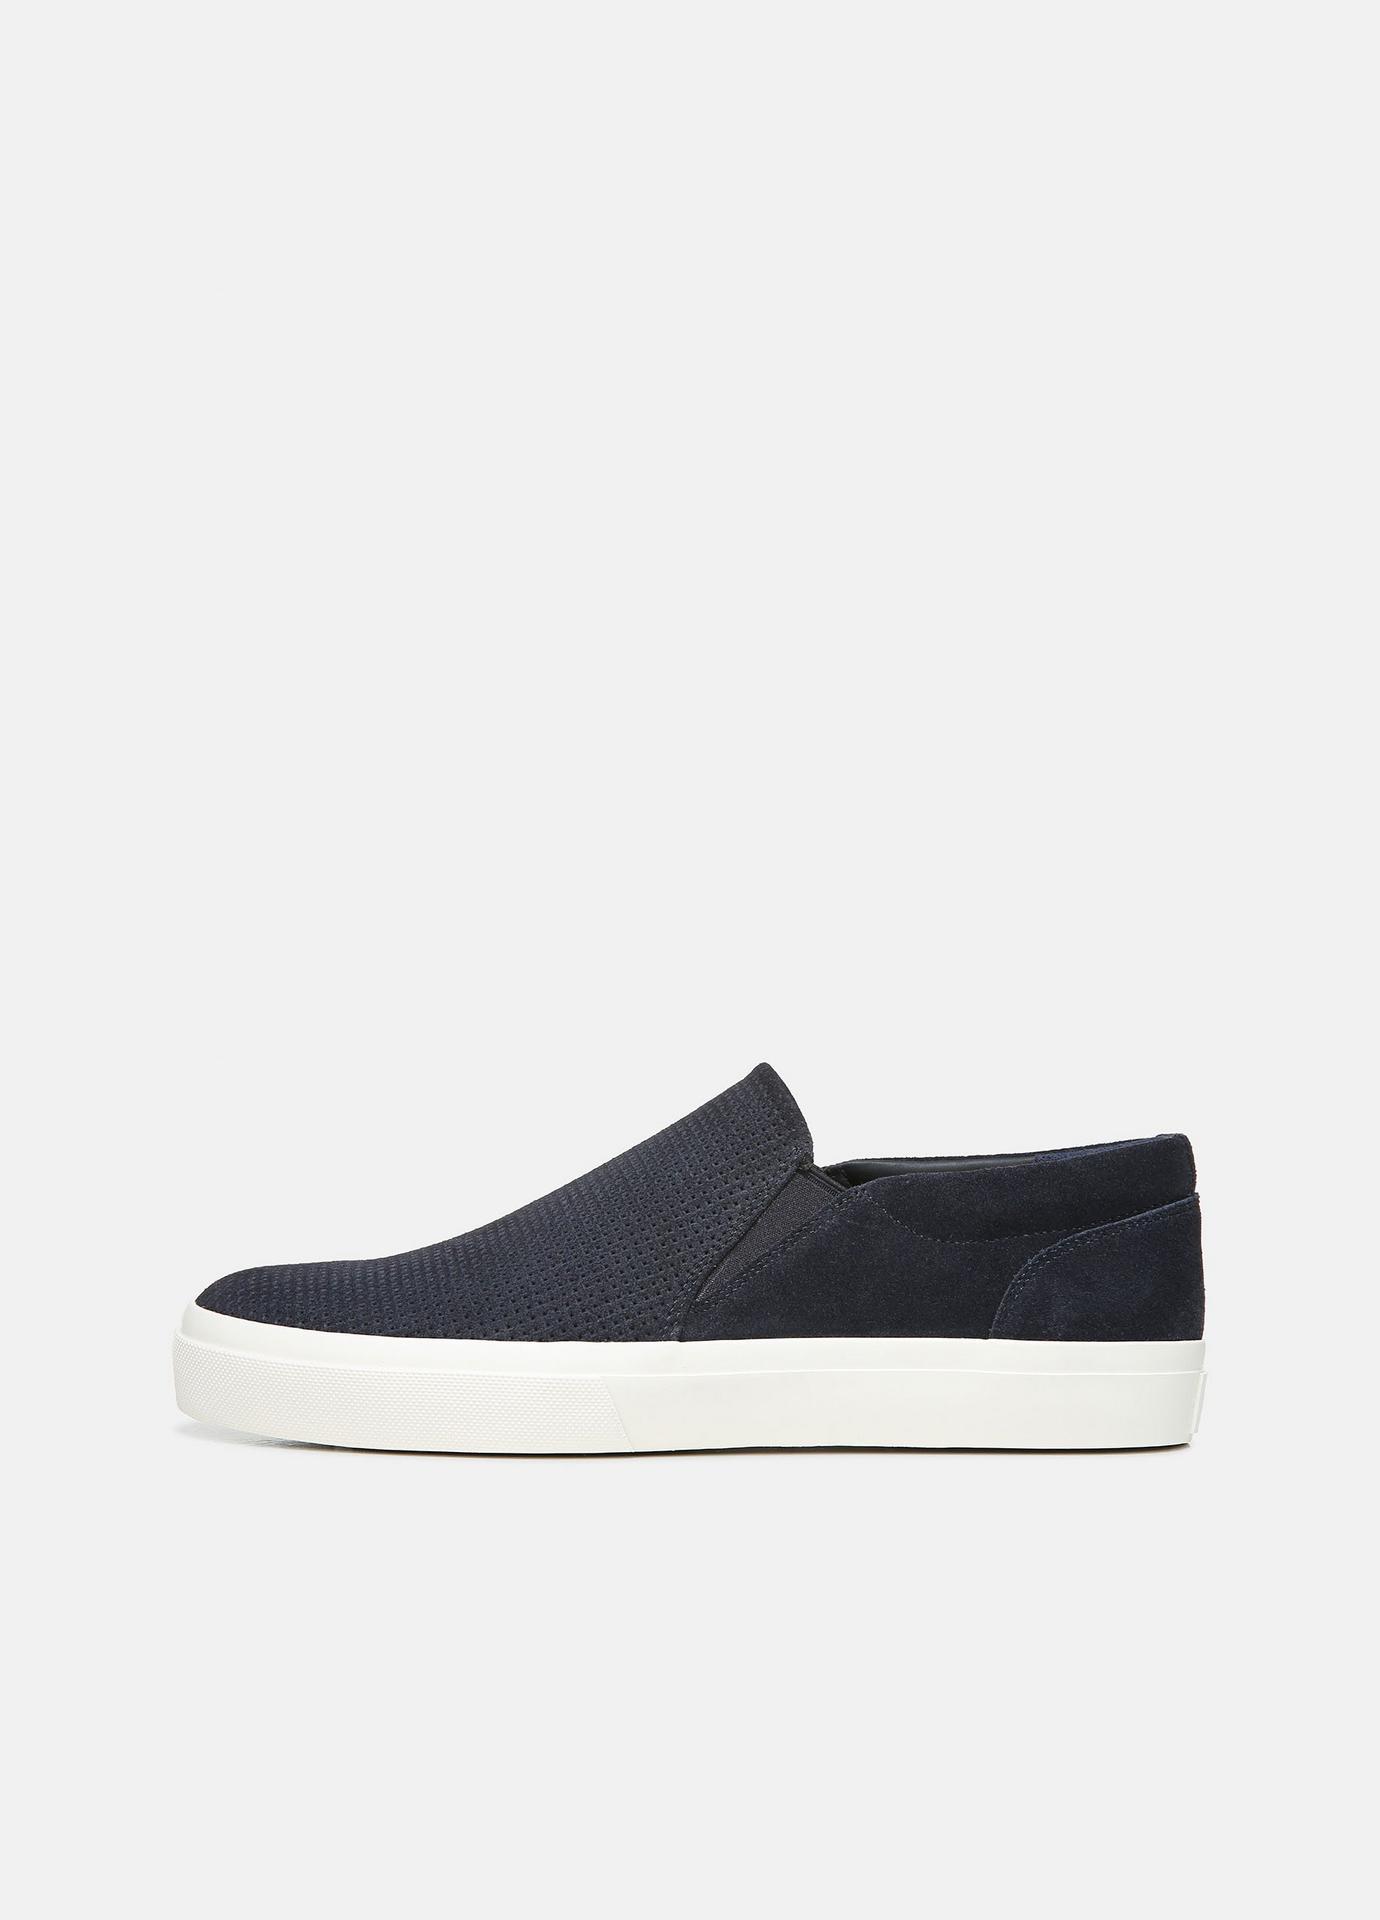 Vince Fletcher Perforated Suede Sneaker